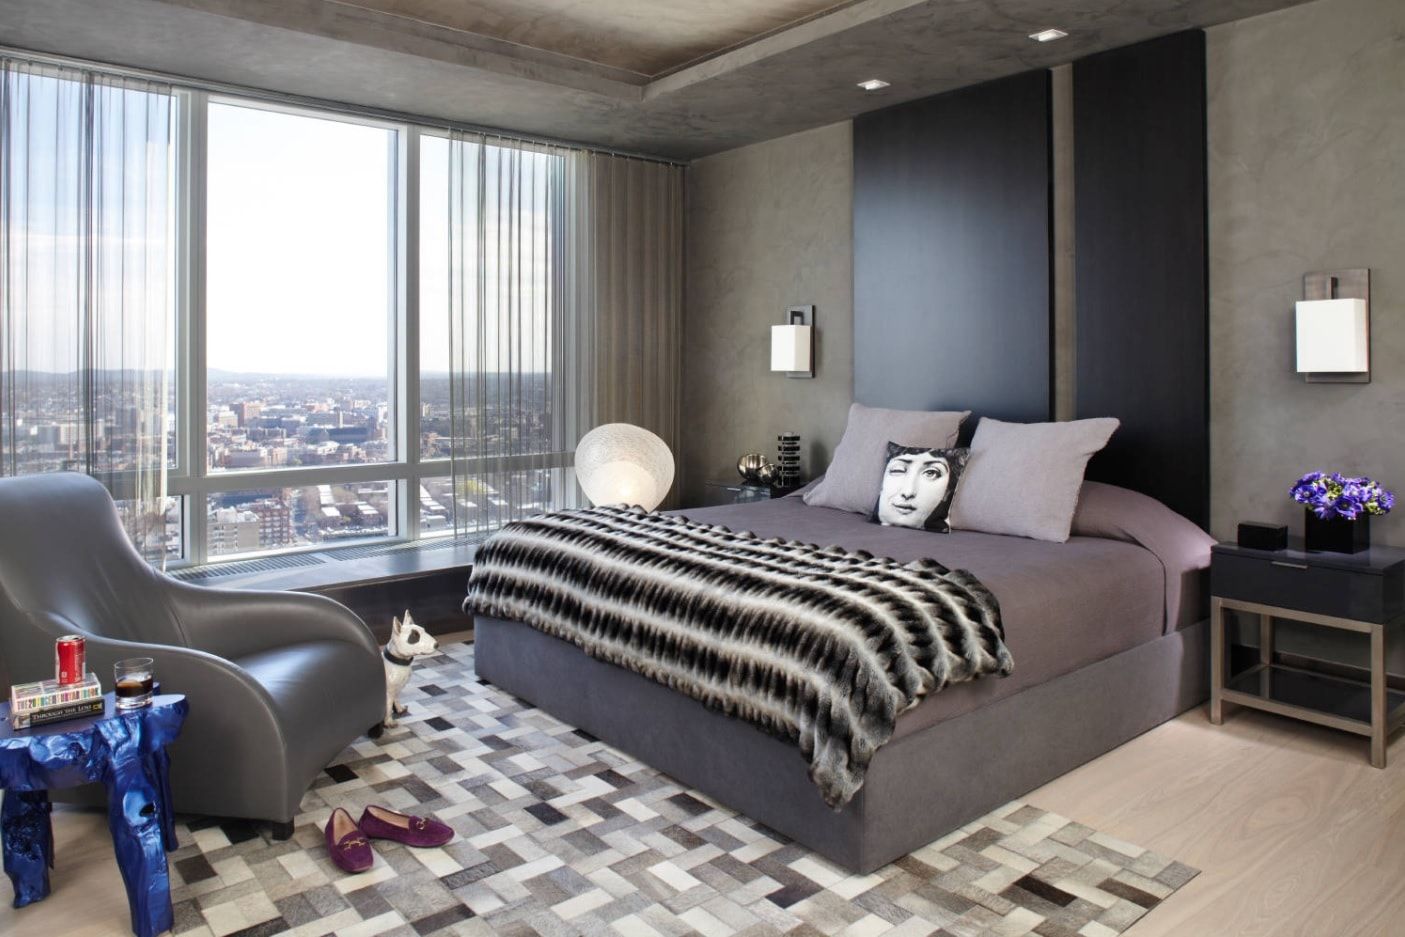 Modern Interior Design Style. Gray shades and zebra coverlet add noble look to the crisp lined design of the modern bedroom